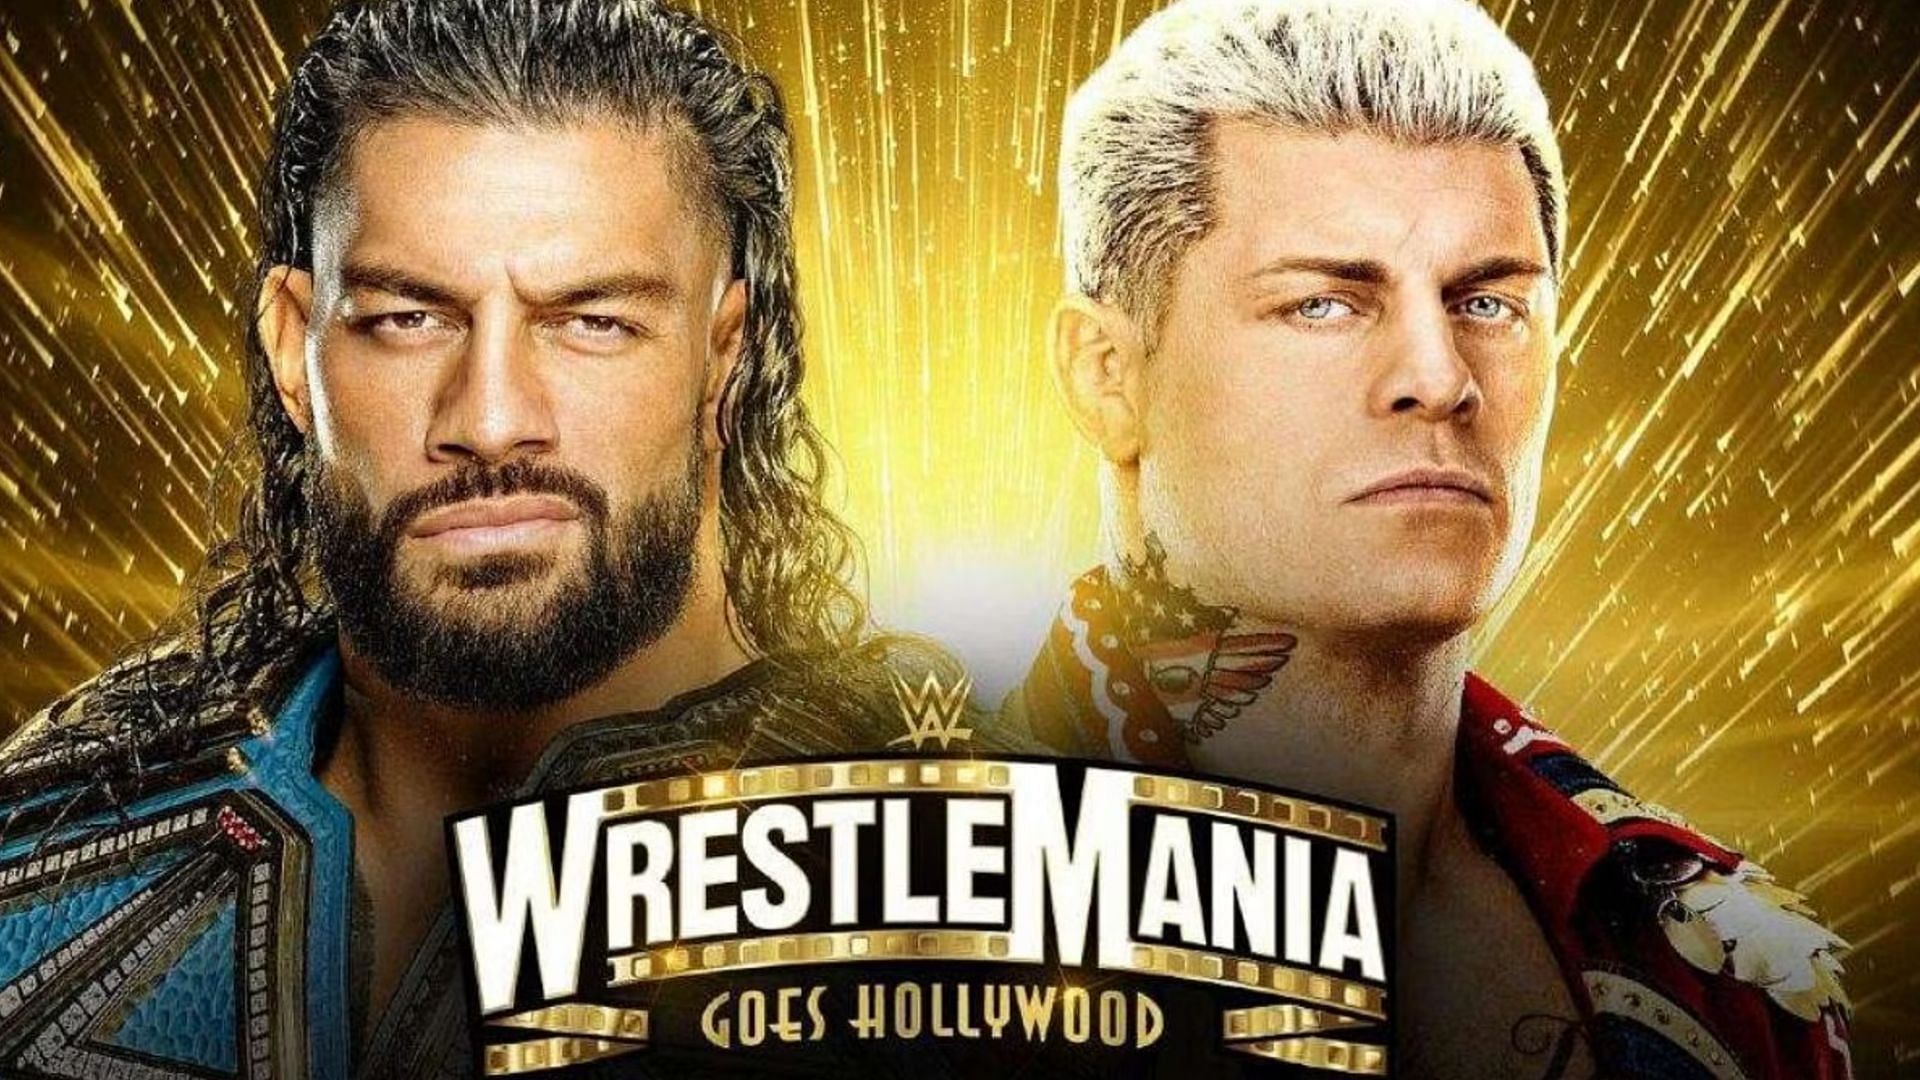 Roman Reigns is currently set to battle Cody Rhodes at WrestleMania 39